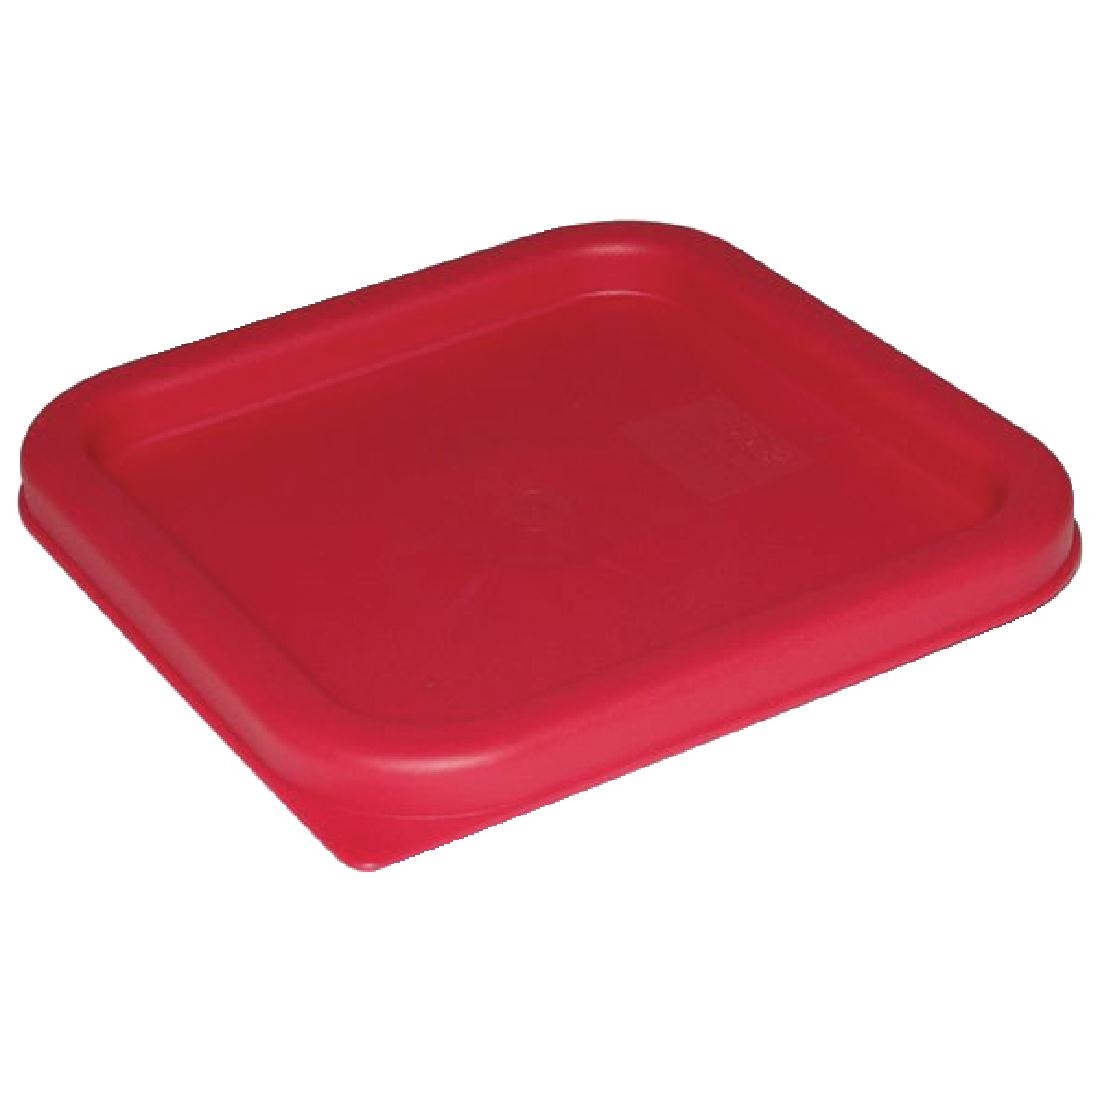 Vogue Square Lid Red Large